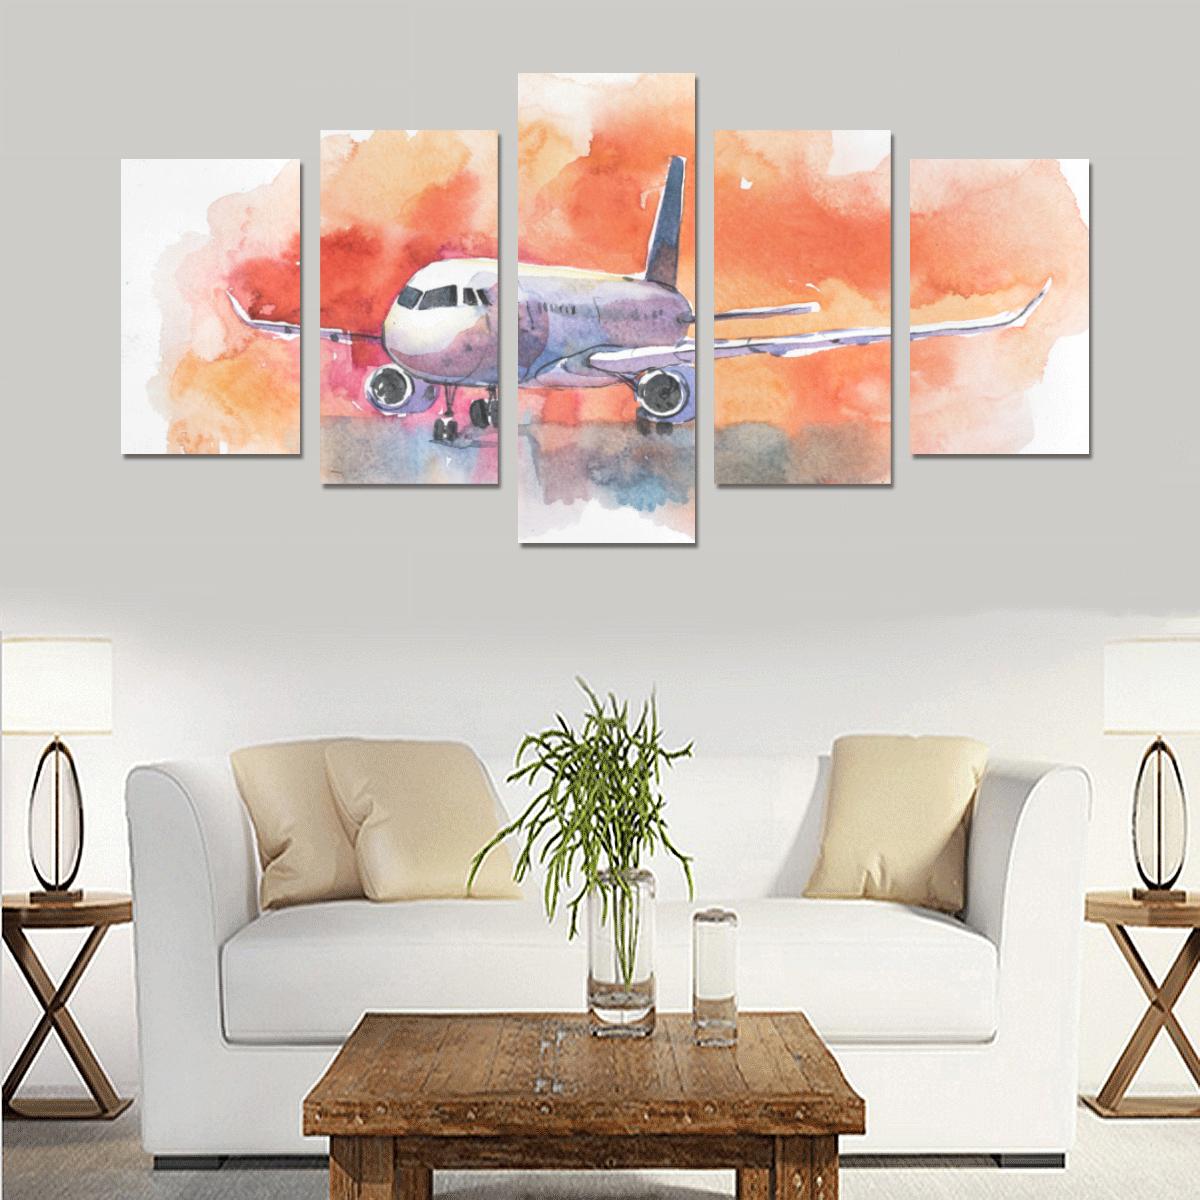 AIRCRAFT. AIRPLANE FLYING IN THE CLOUDY SKY. PASSE CANVAS PRINT SETS C (NO FRAME) THE AV8R